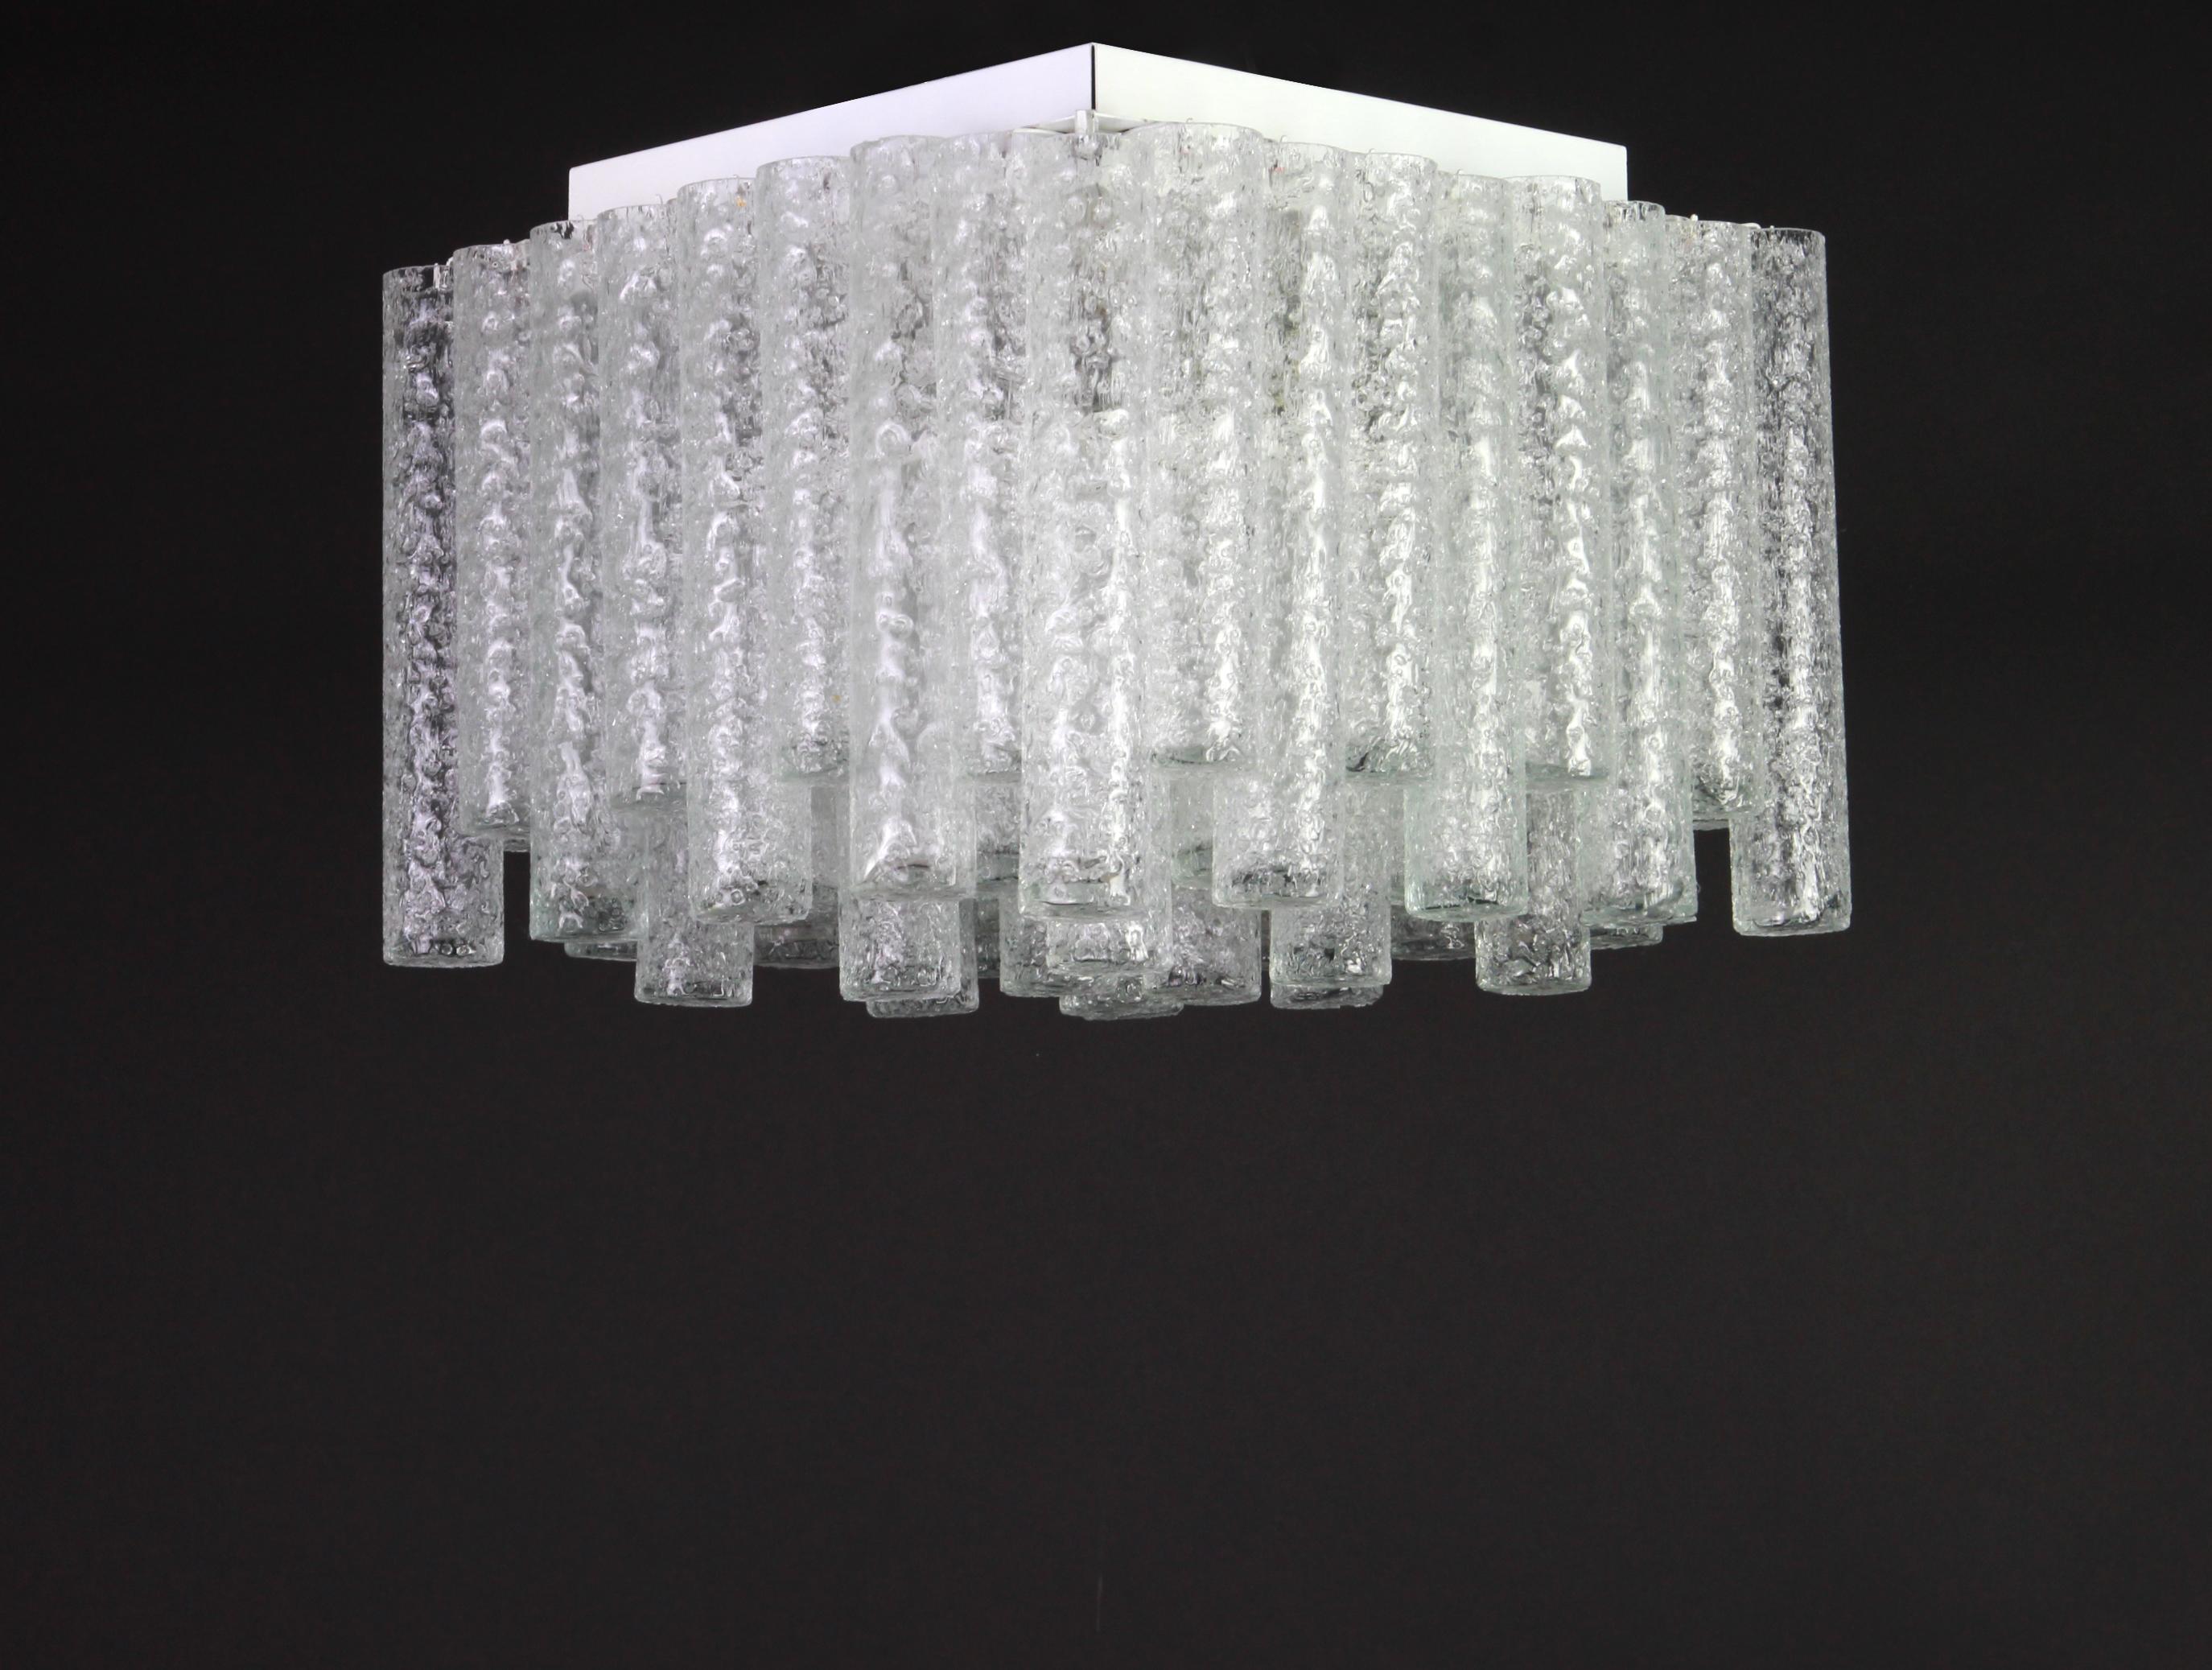 Fantastic big midcentury chandelier by Doria, Germany, manufactured, circa 1960-1969. Many Murano glass cylinders suspended from the fixture.
Wonderful geometric design.
High quality and in very good condition. Cleaned, well-wired and ready to